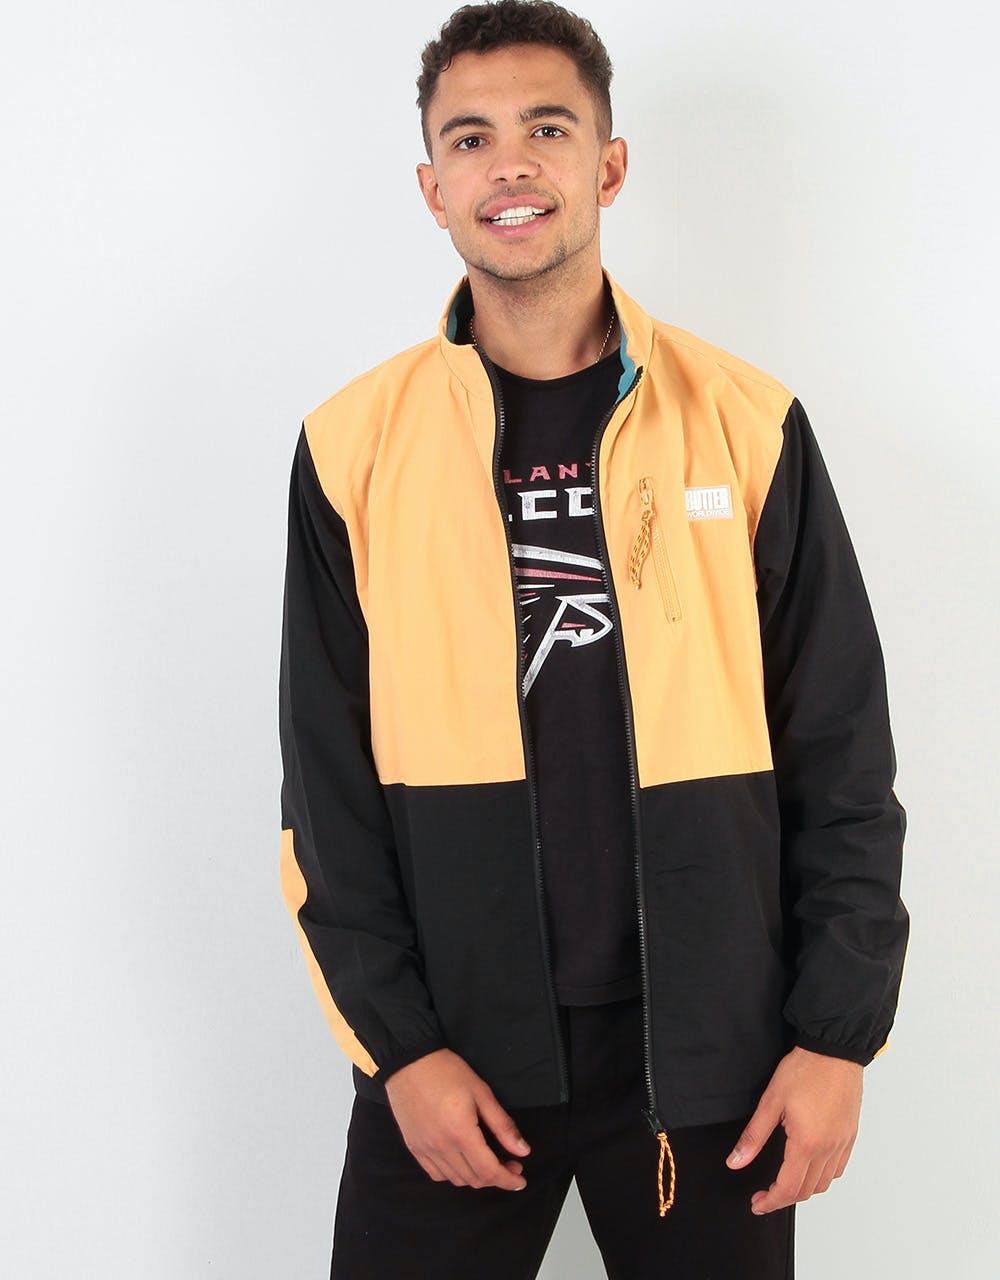 Butter Goods Search Jacket - Black/Peach